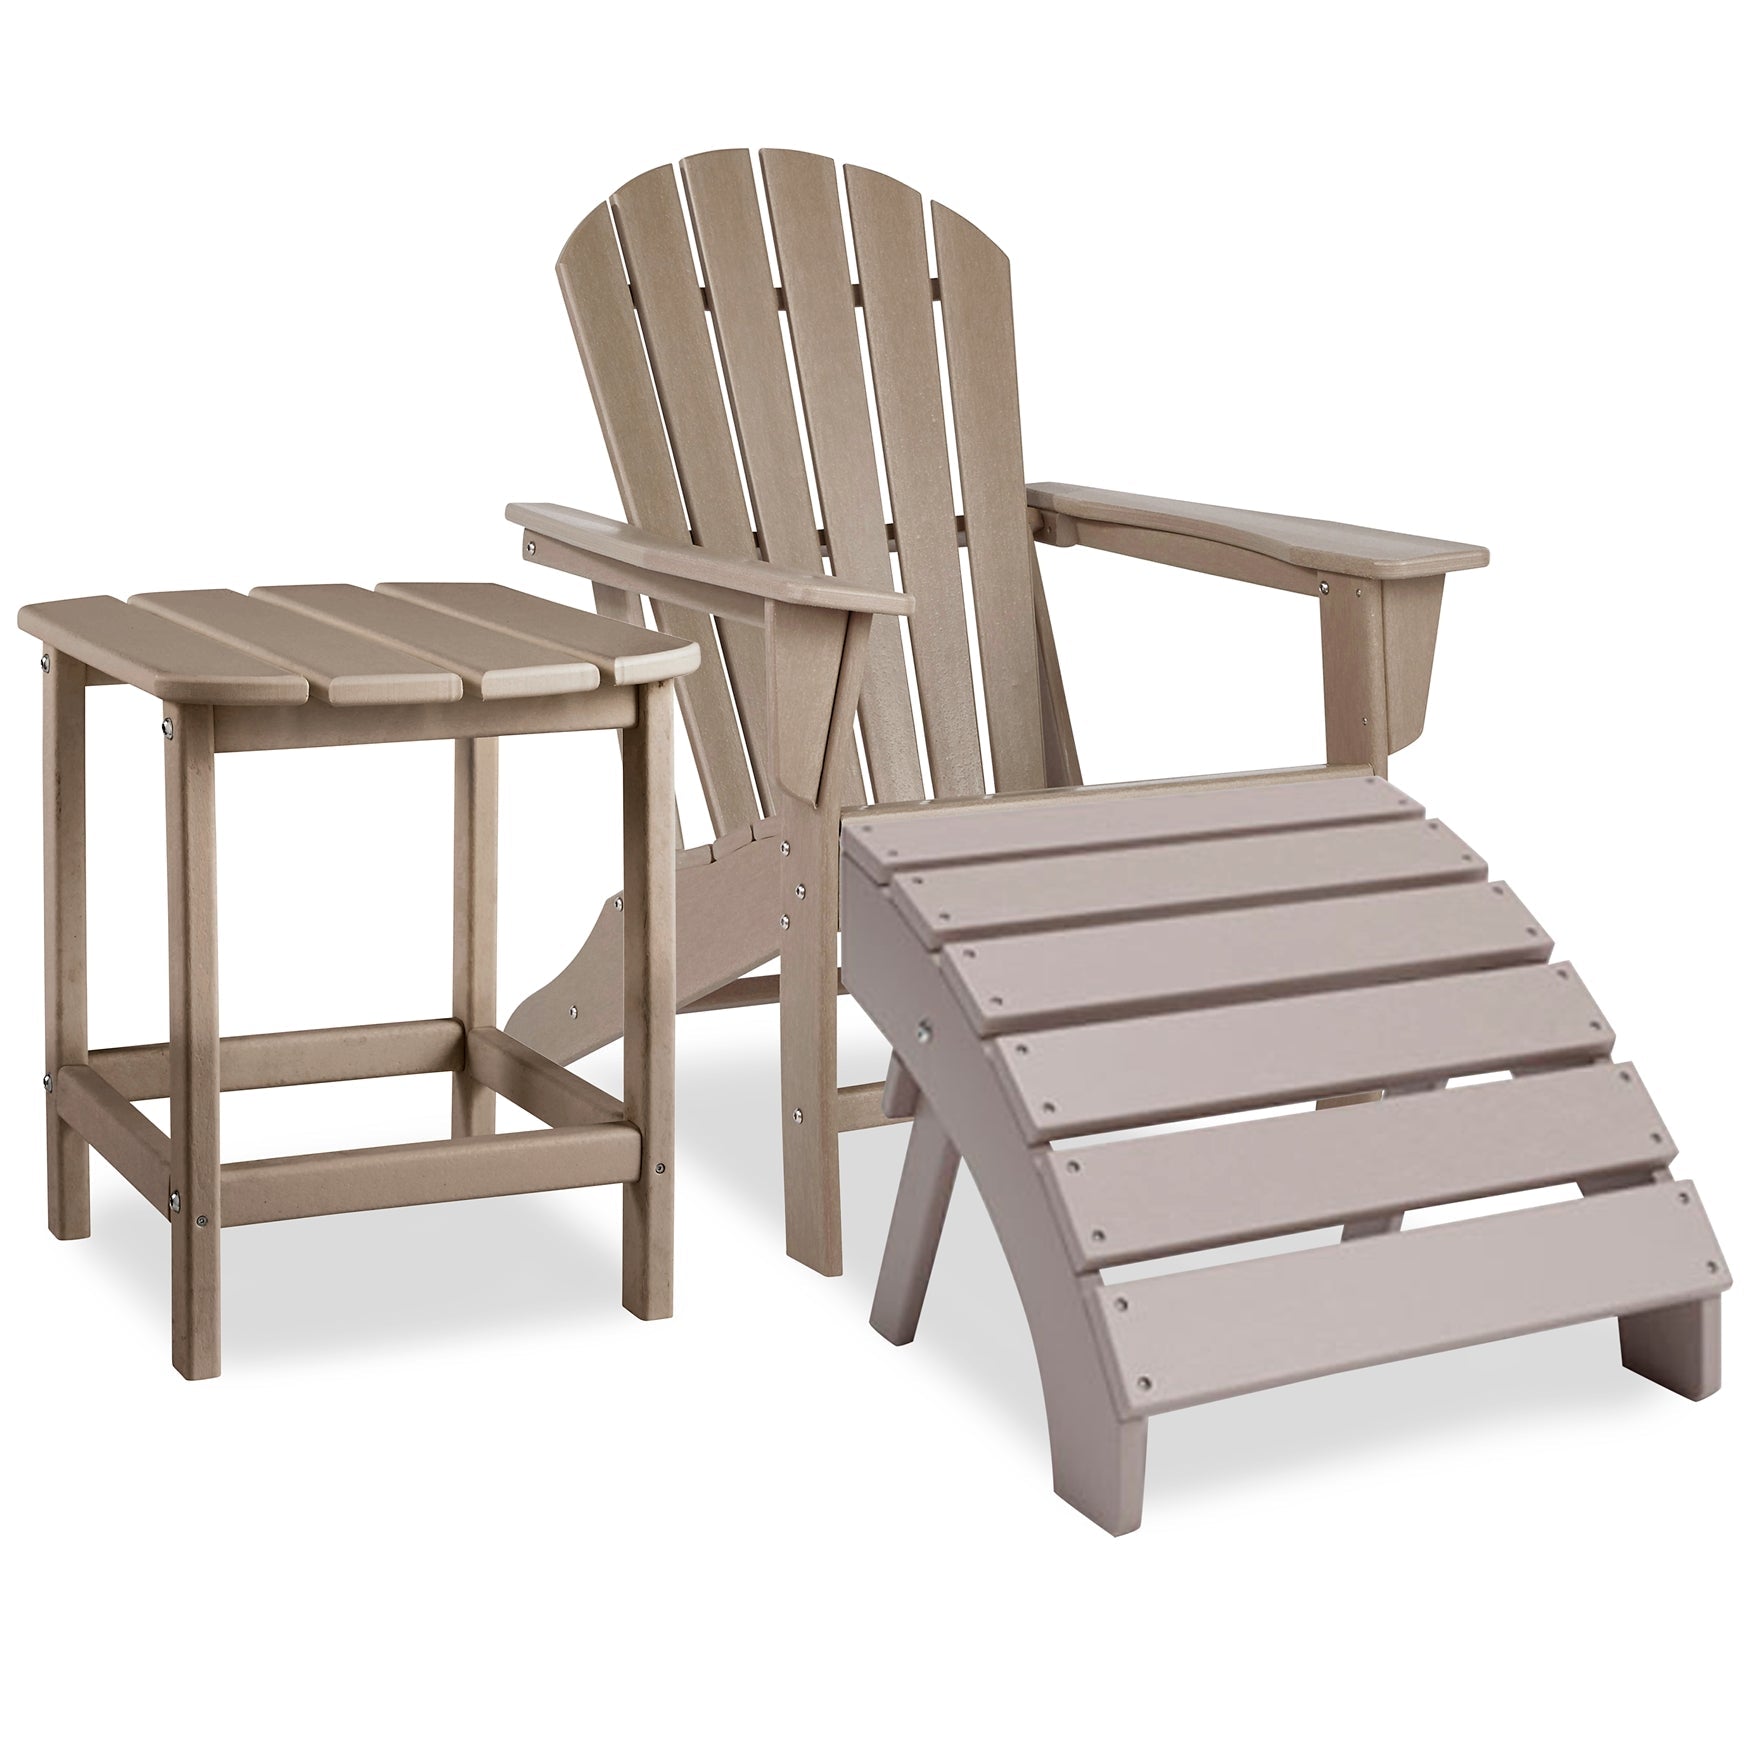 Sundown Treasure Outdoor Adirondack Chair and Ottoman with Side Table Rent Wise Rent To Own Jacksonville, Florida